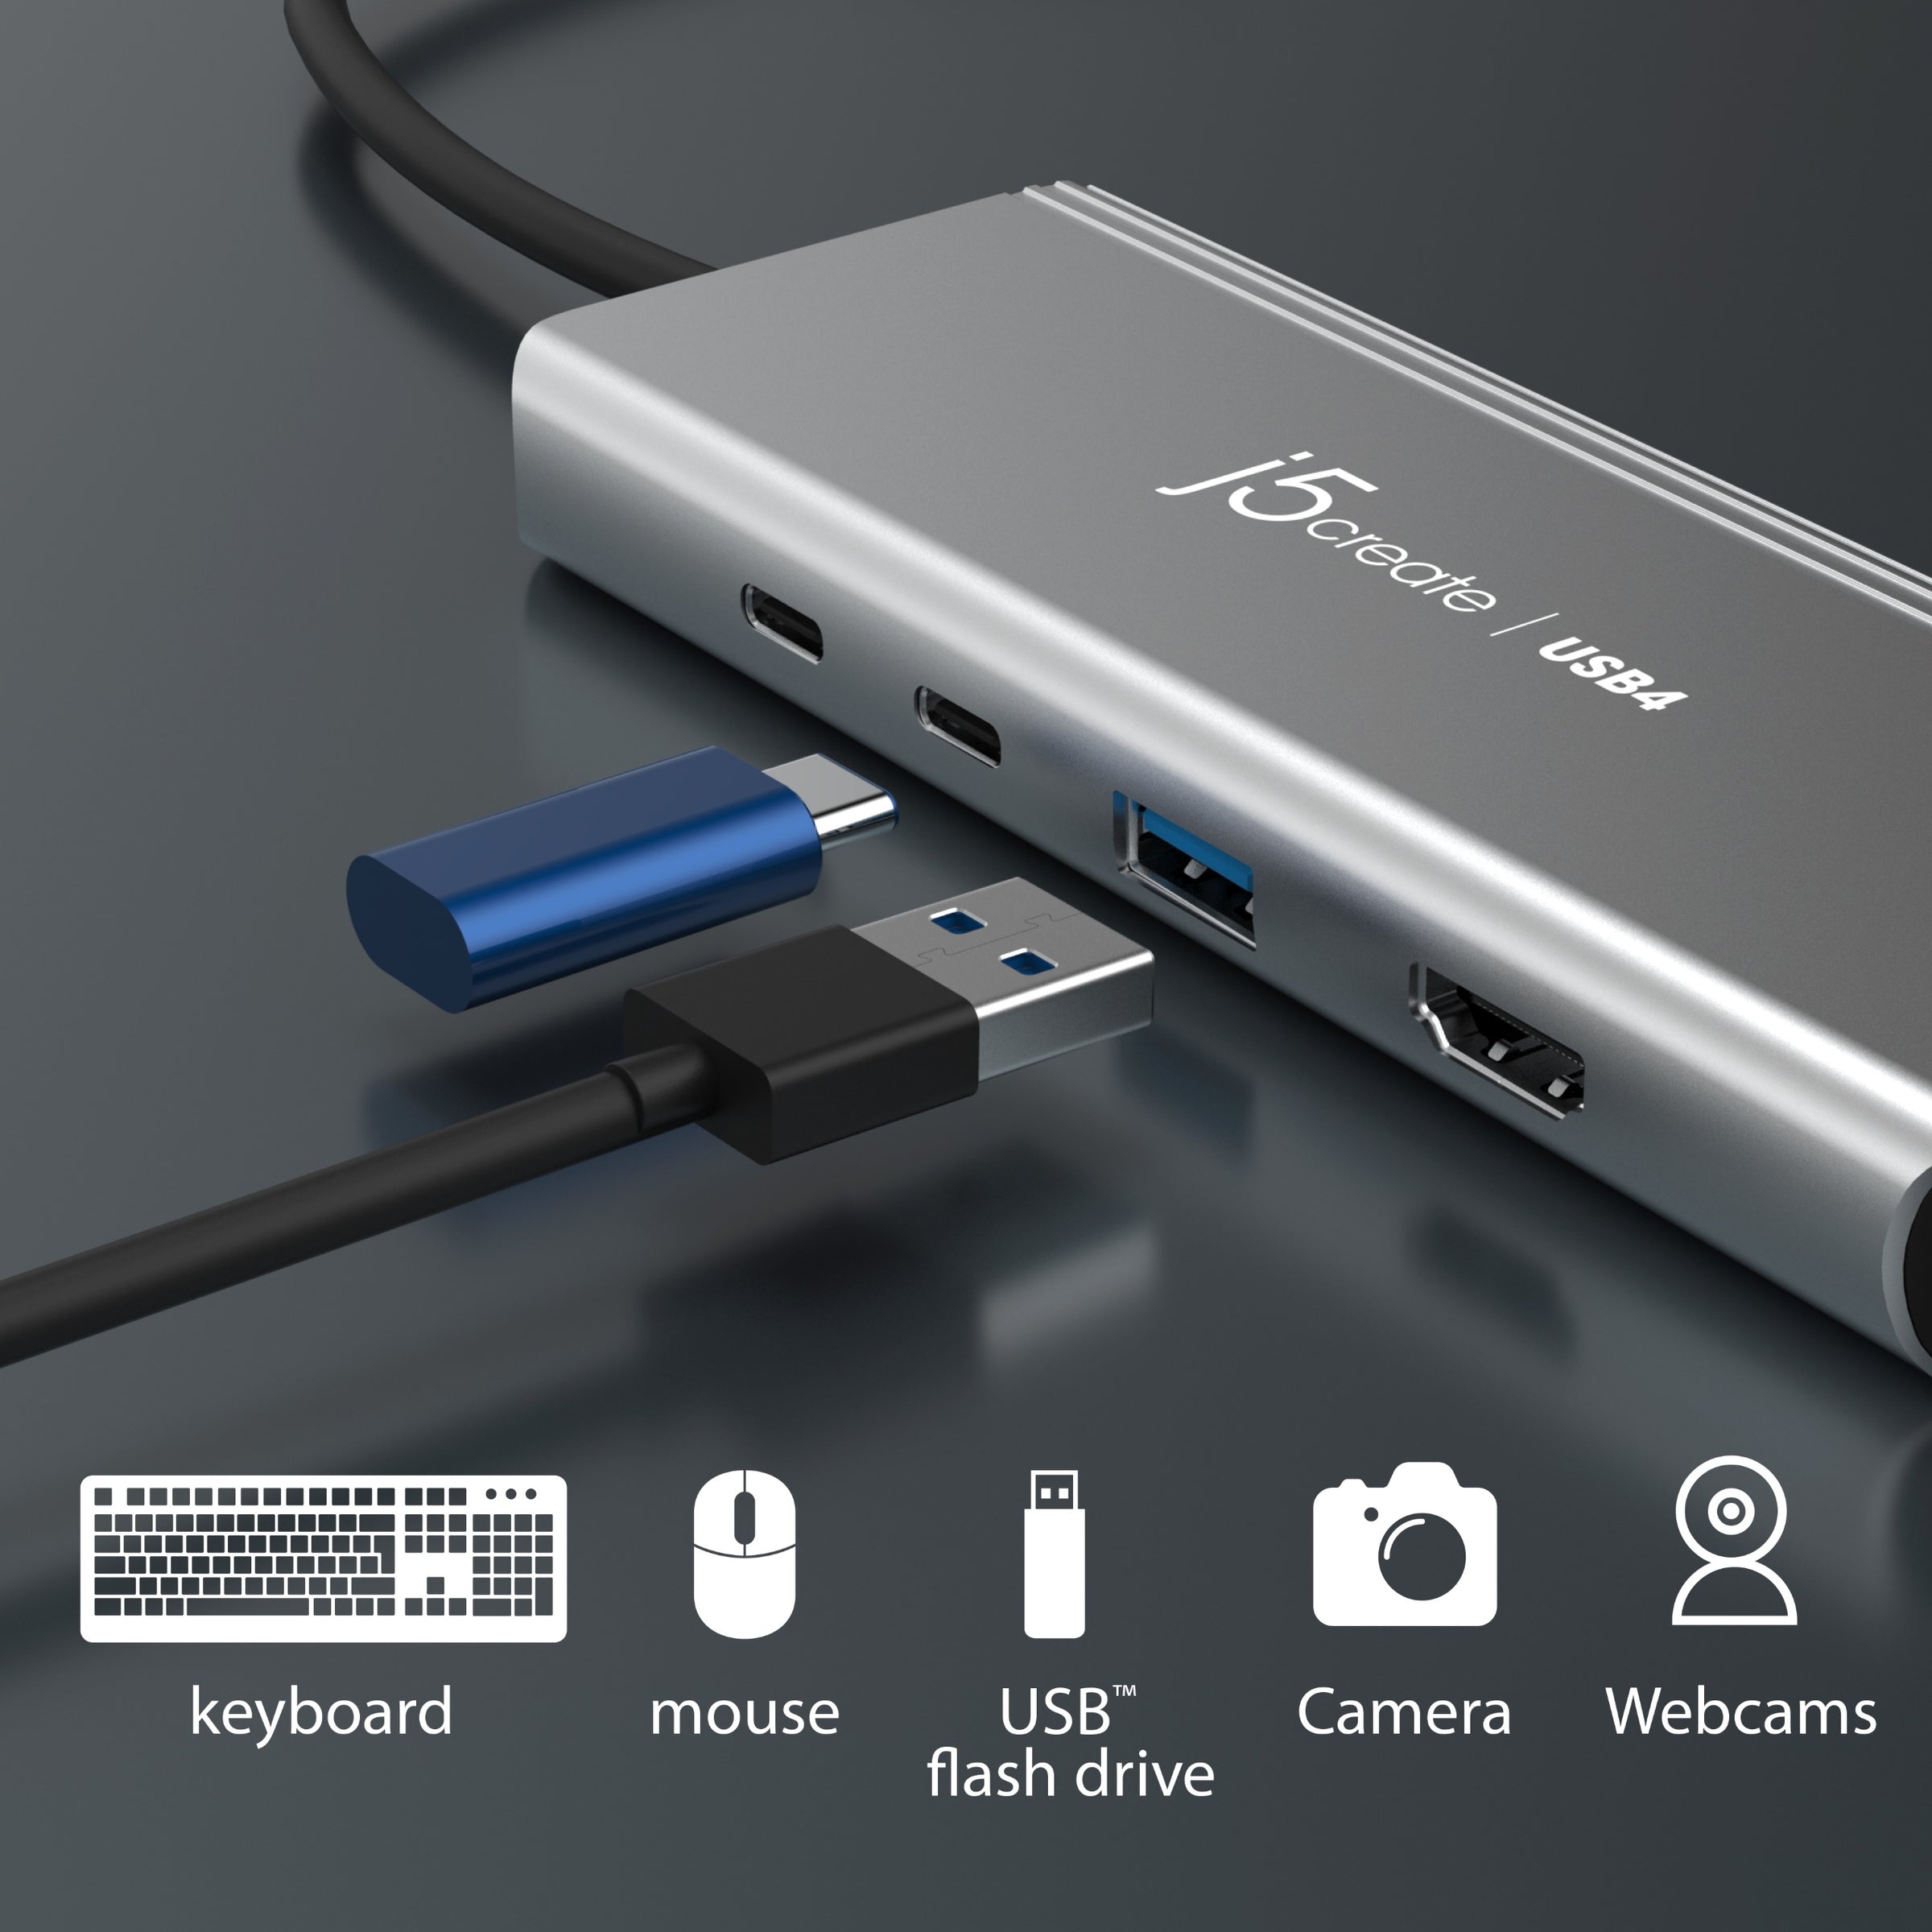 5 in 1 USB C Hub Multiport Adapter with 4K HDMI Output - Grey